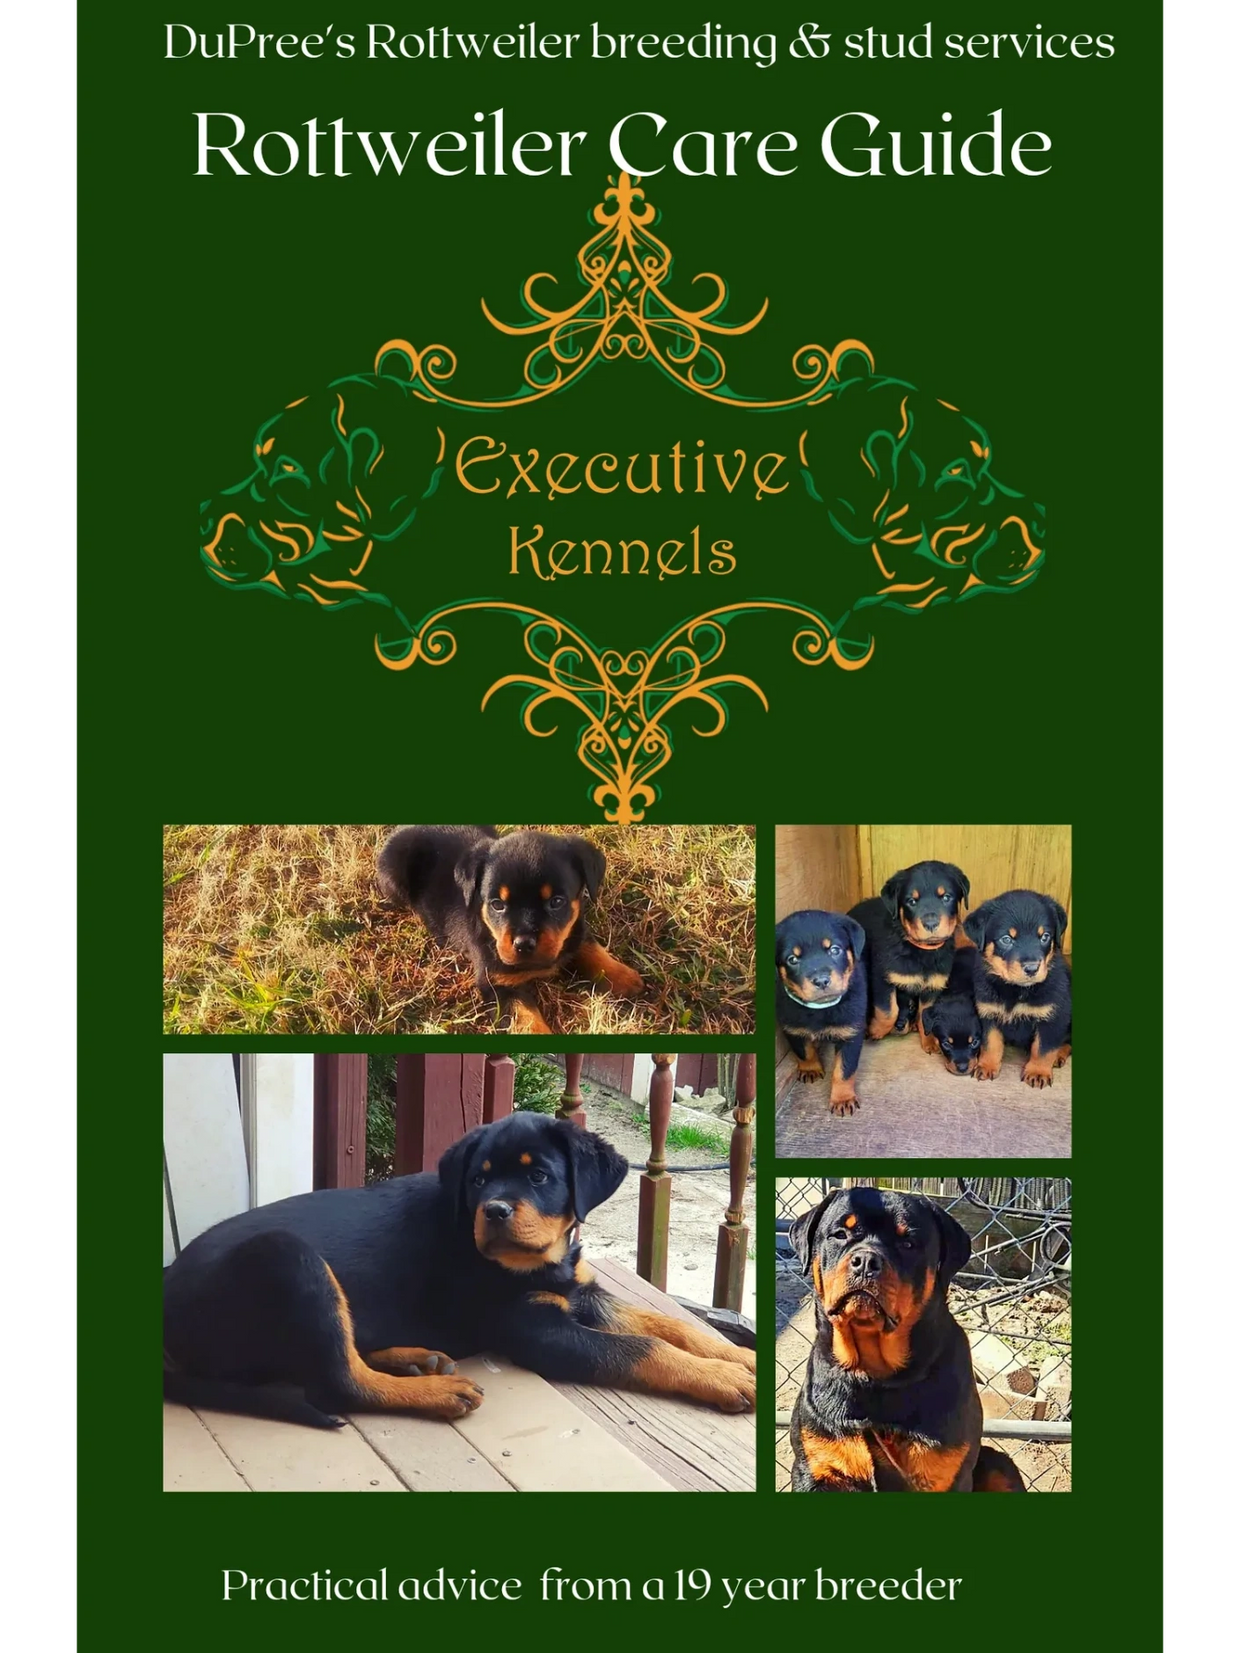 Rottweiler puppy care guide. Helping you and your new Rottweiler puppy thrive TOGETHER